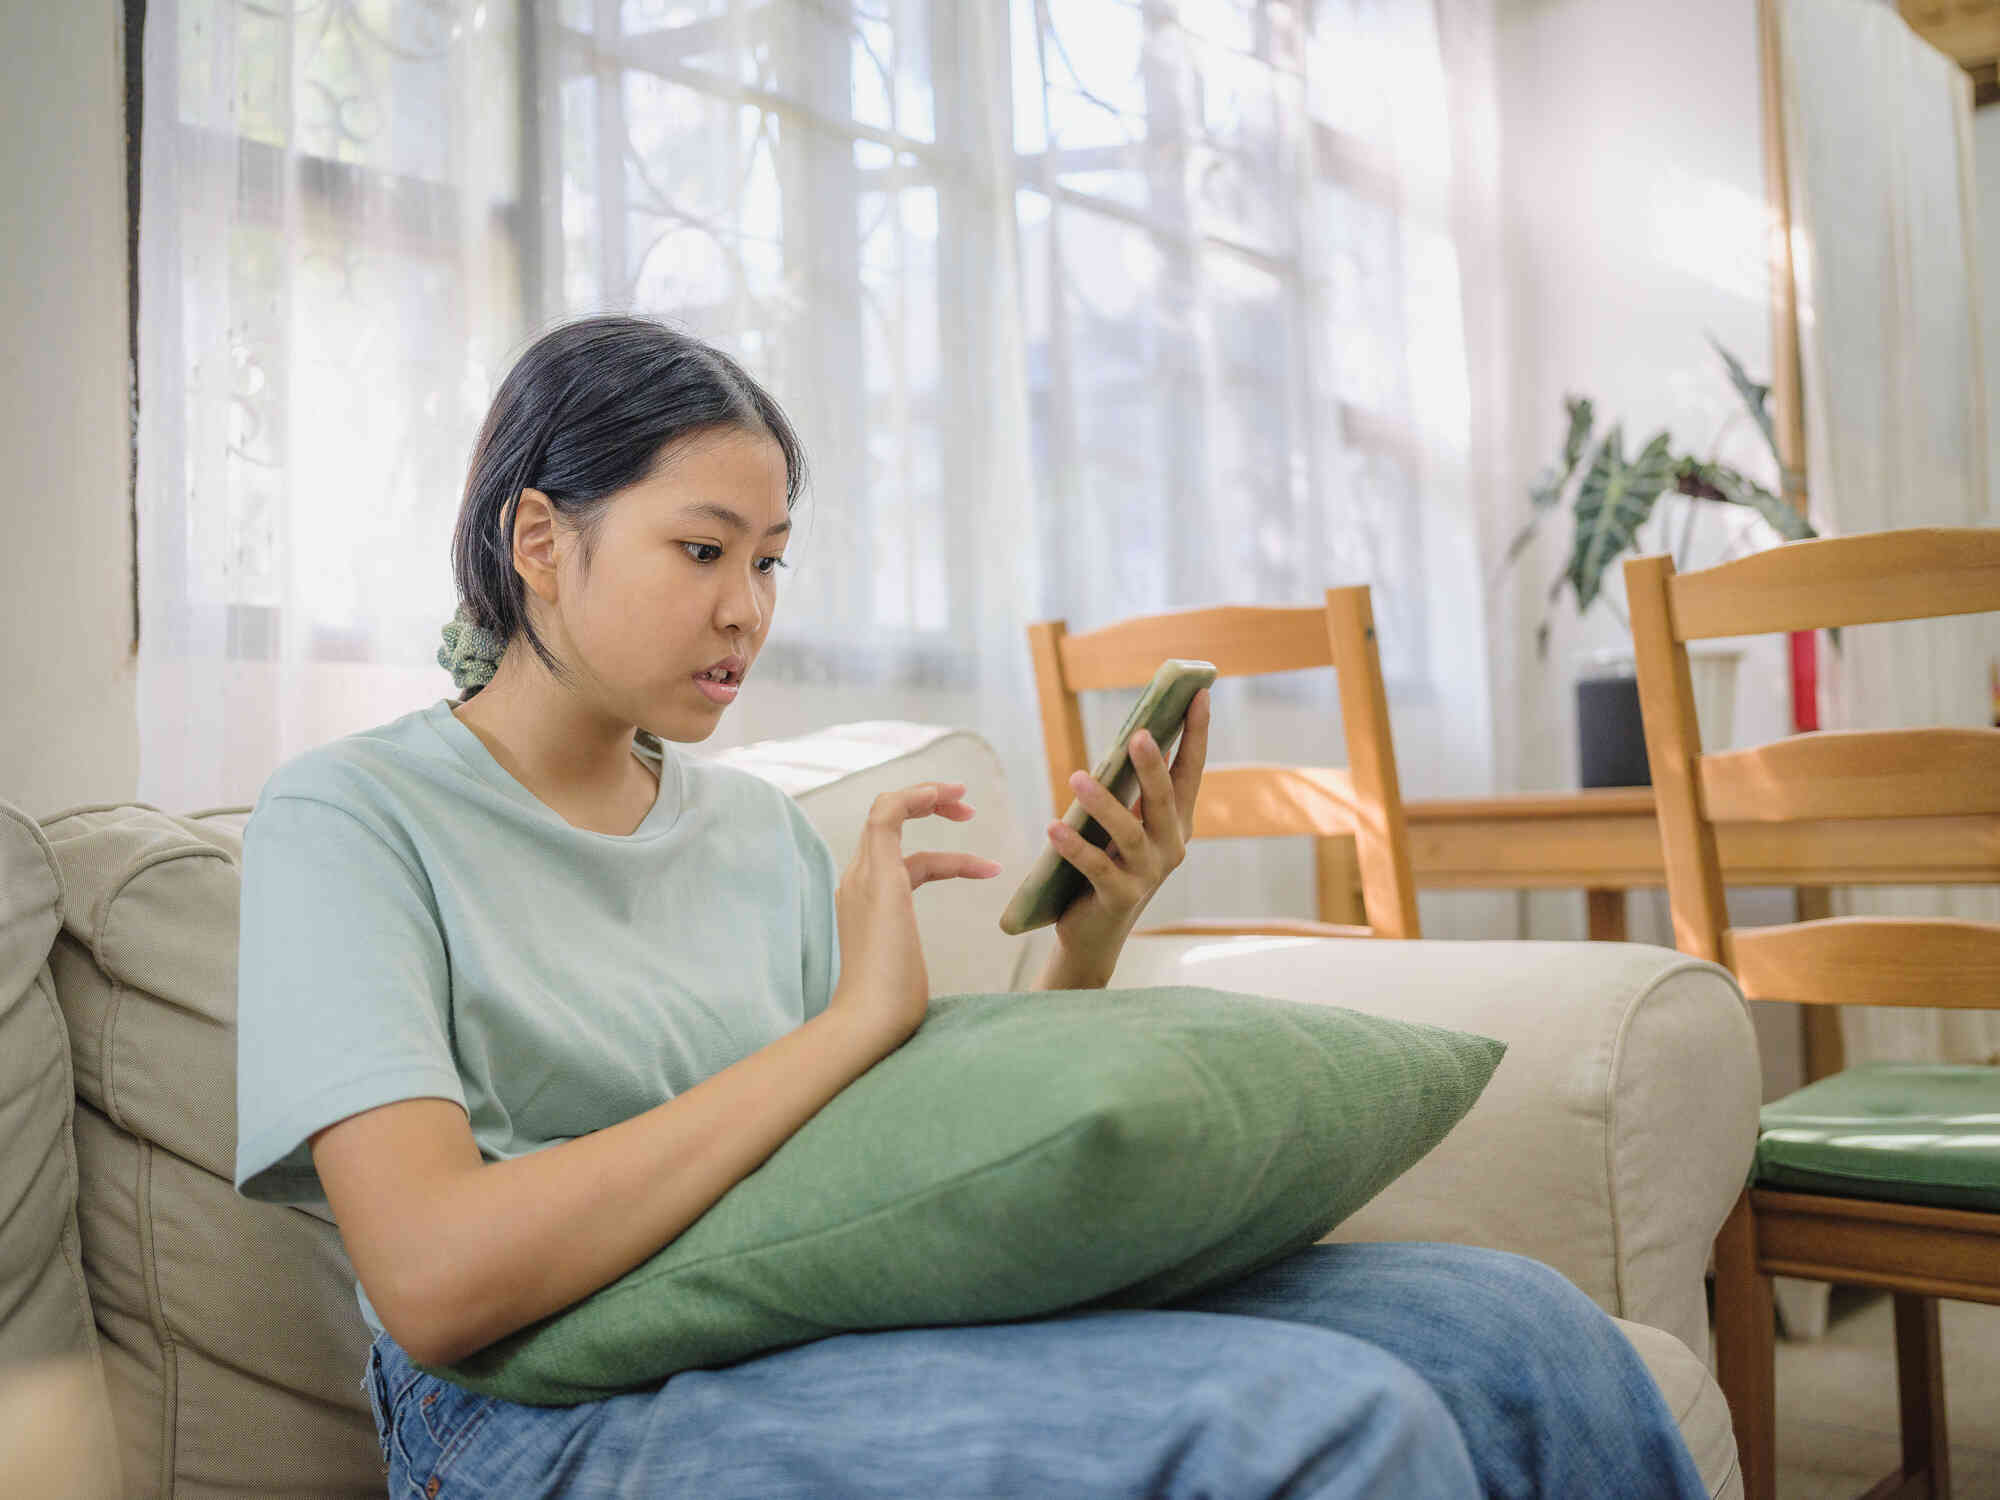 A teen girl in a green shirt sits on the couch and taps on her cellphone in her hand with a worried expression.